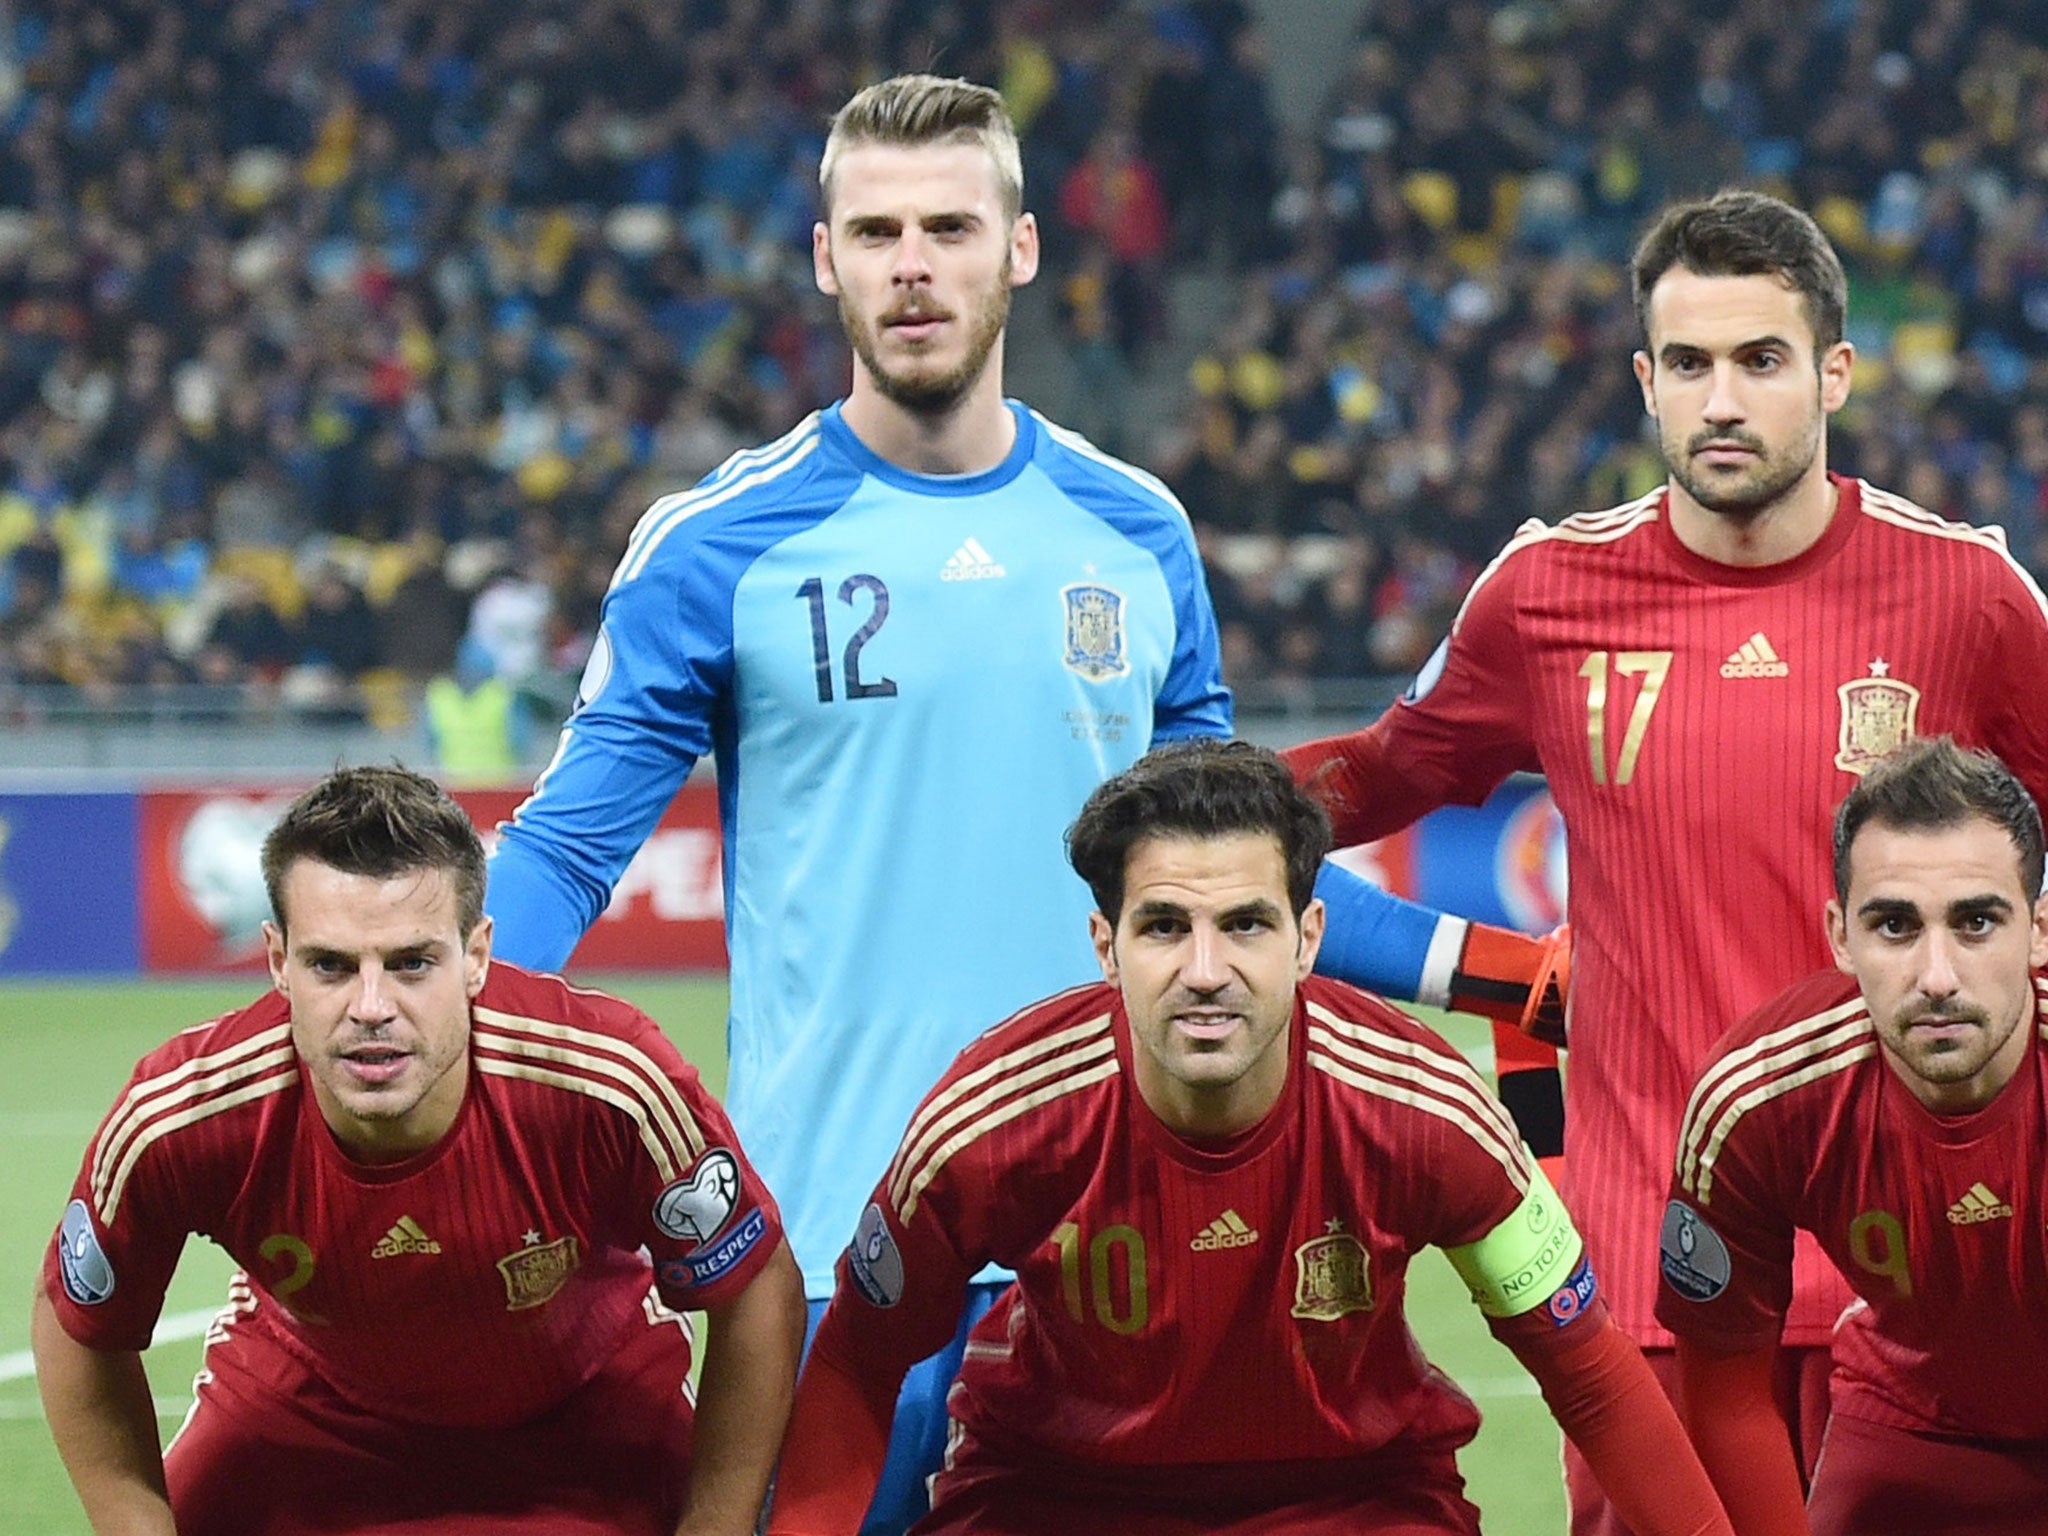 David De Gea and Cesc Fabregas among the Spain squad for their match with Ukraine